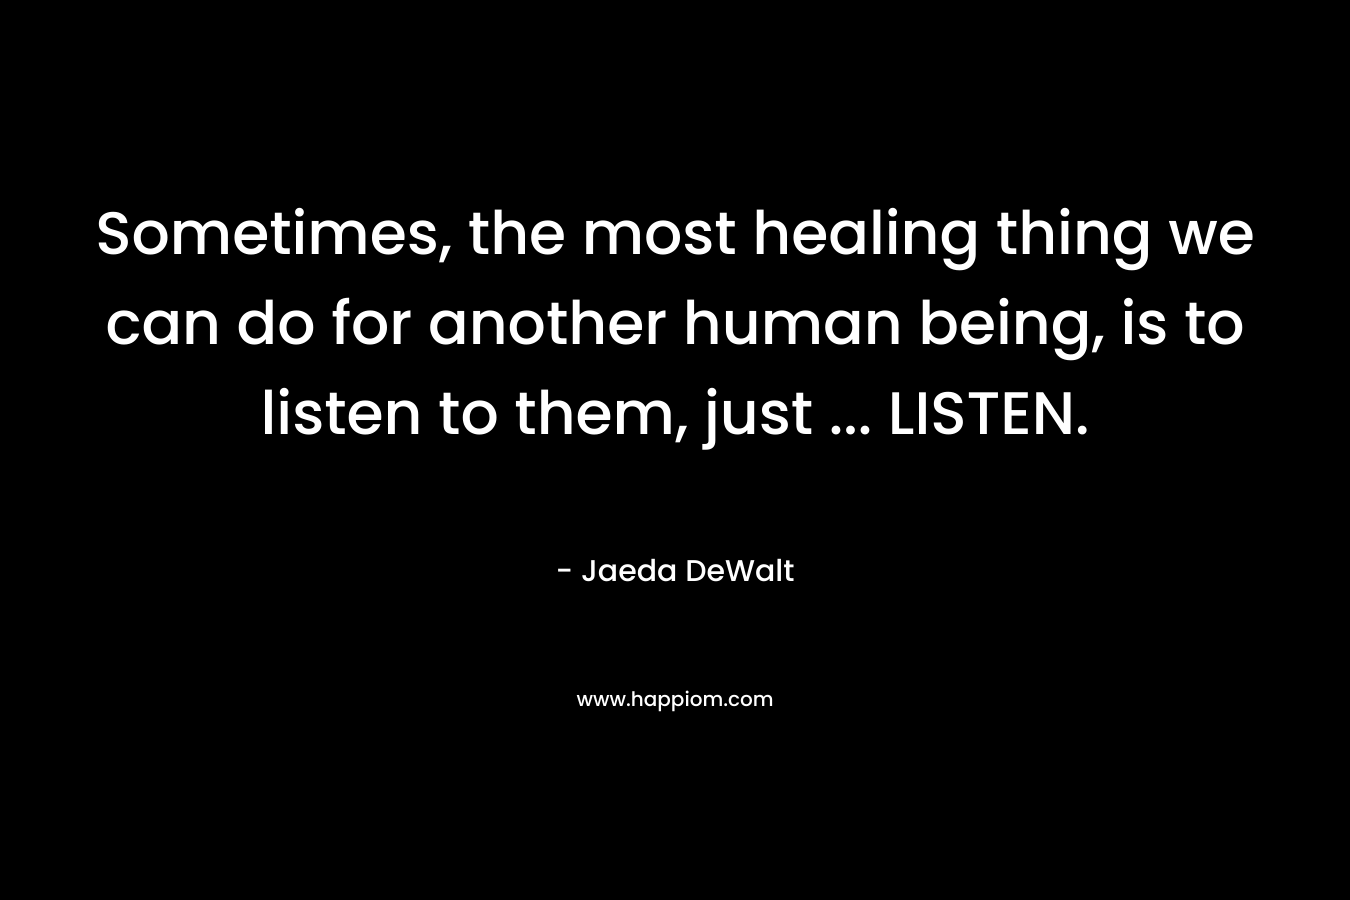 Sometimes, the most healing thing we can do for another human being, is to listen to them, just ... LISTEN.